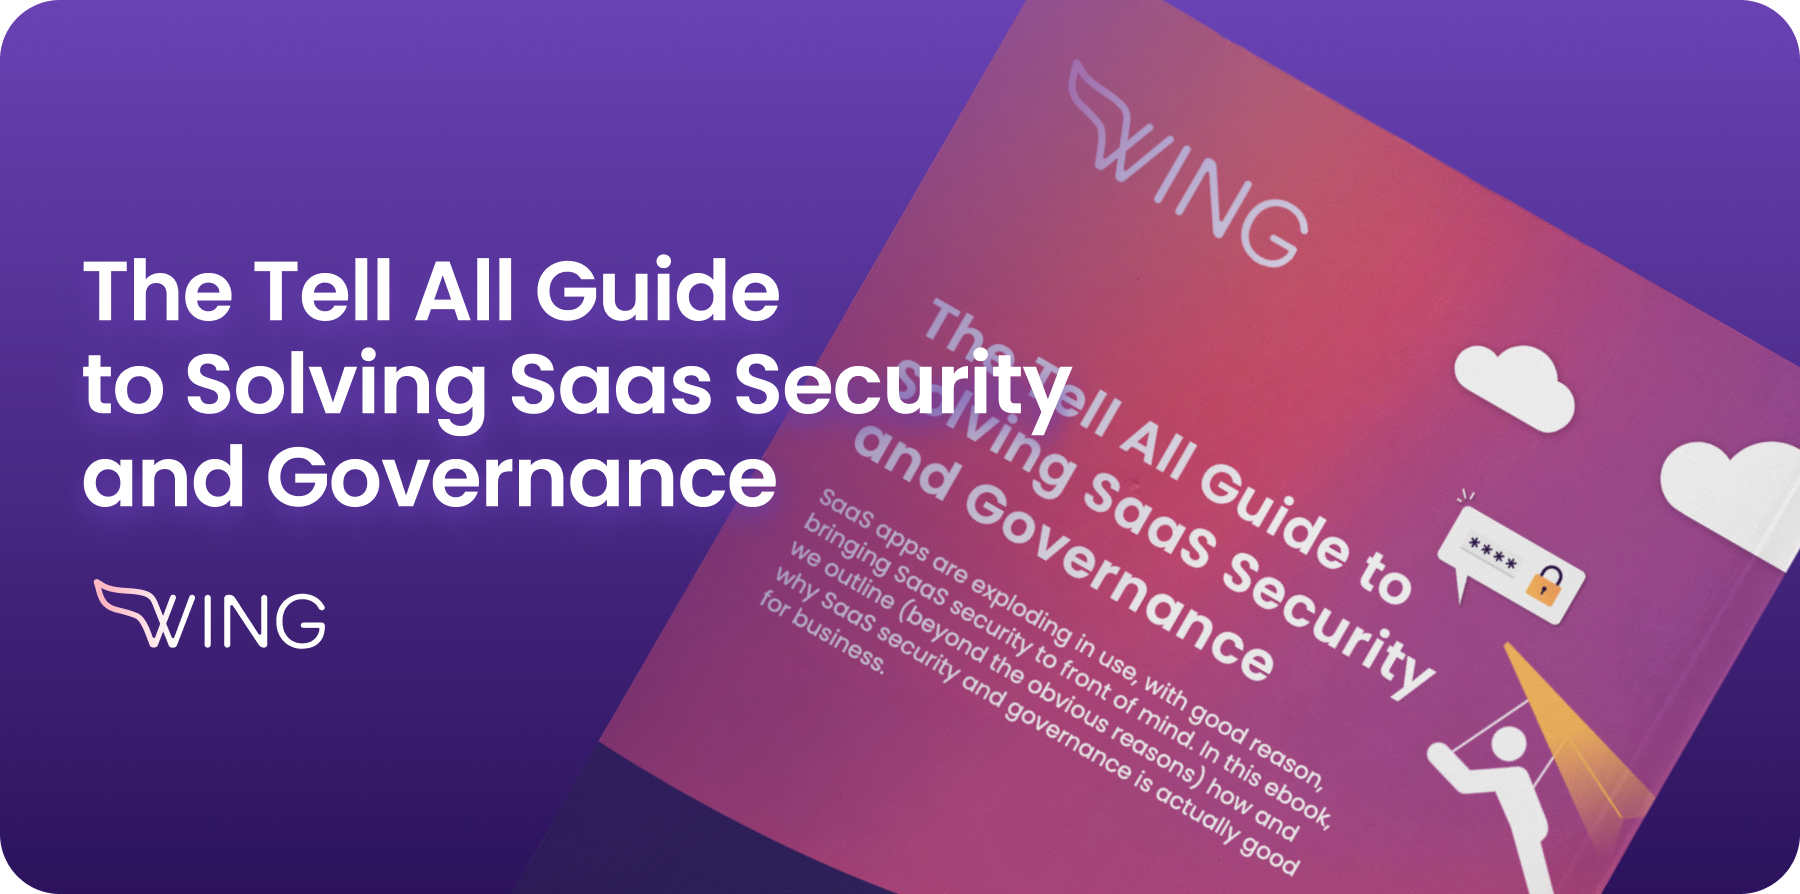 The Tell All Guide To Solving SaaS Security and Governance WING